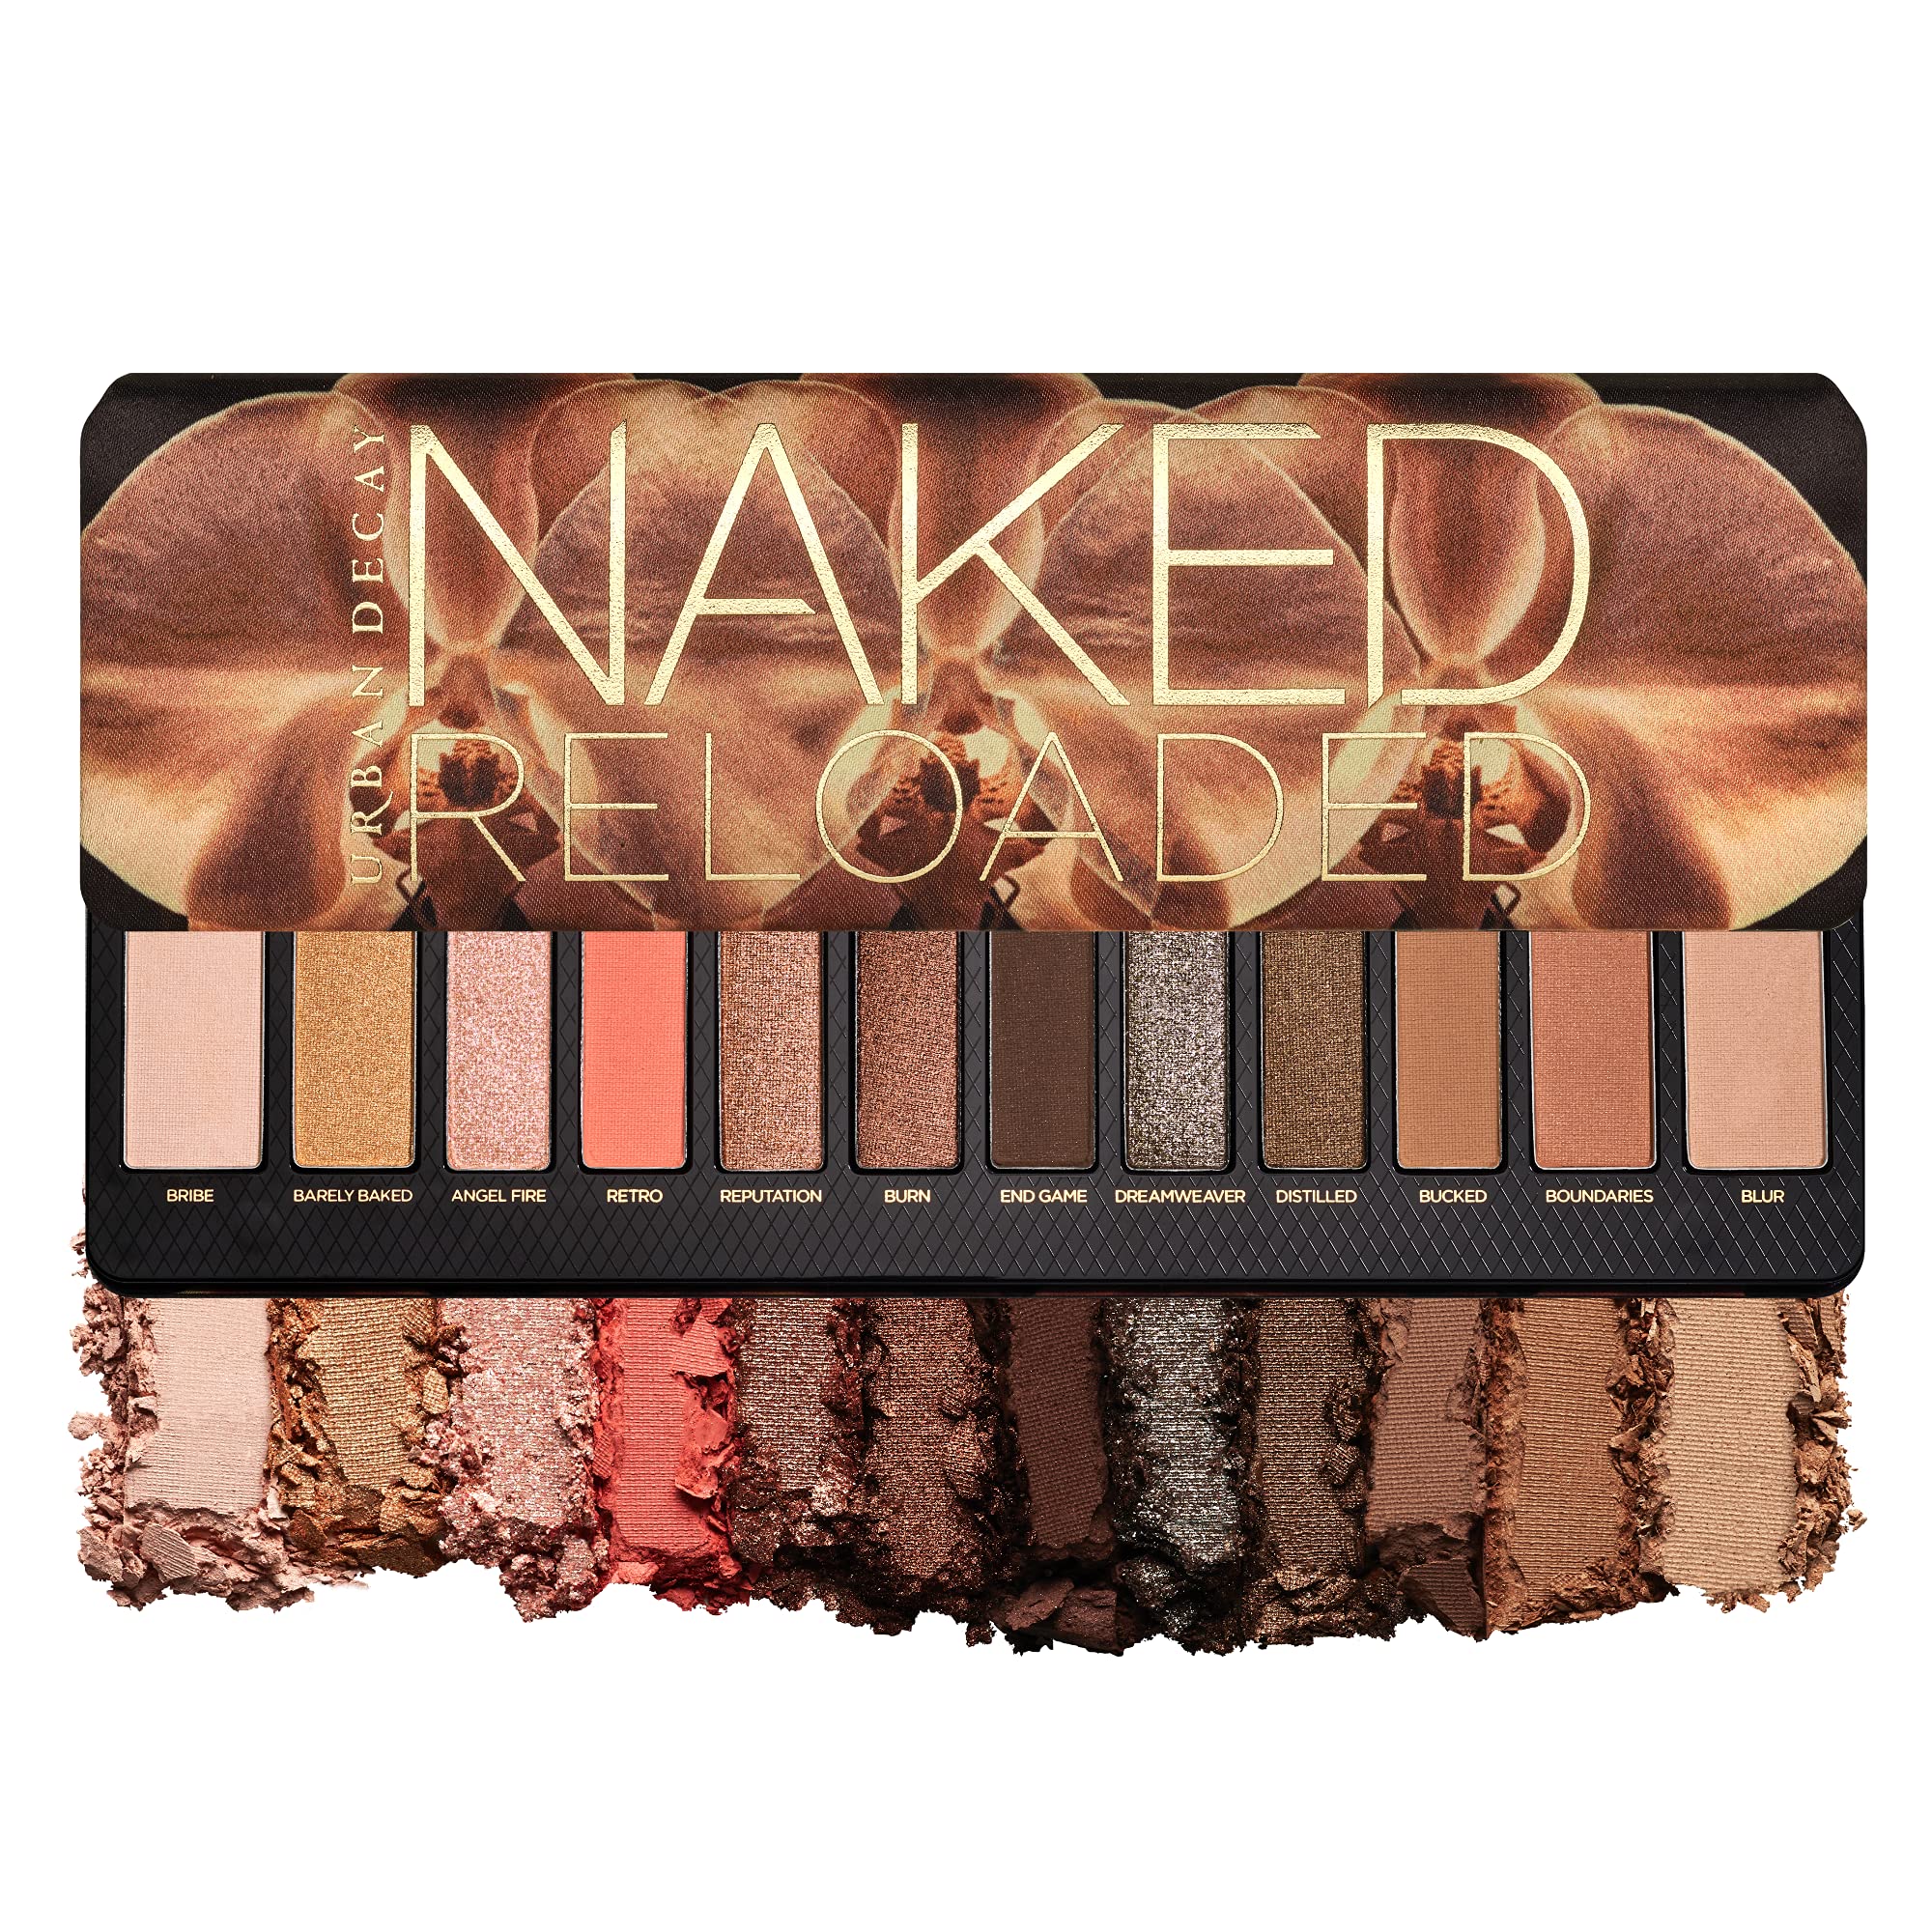 Urban Decay Naked Reloaded Eyeshadow Palette 12 Universally Flattering  Neutral Shades - Ultra-Blendable Rich Colors with Velvety Texture - Set  Includes Mirror